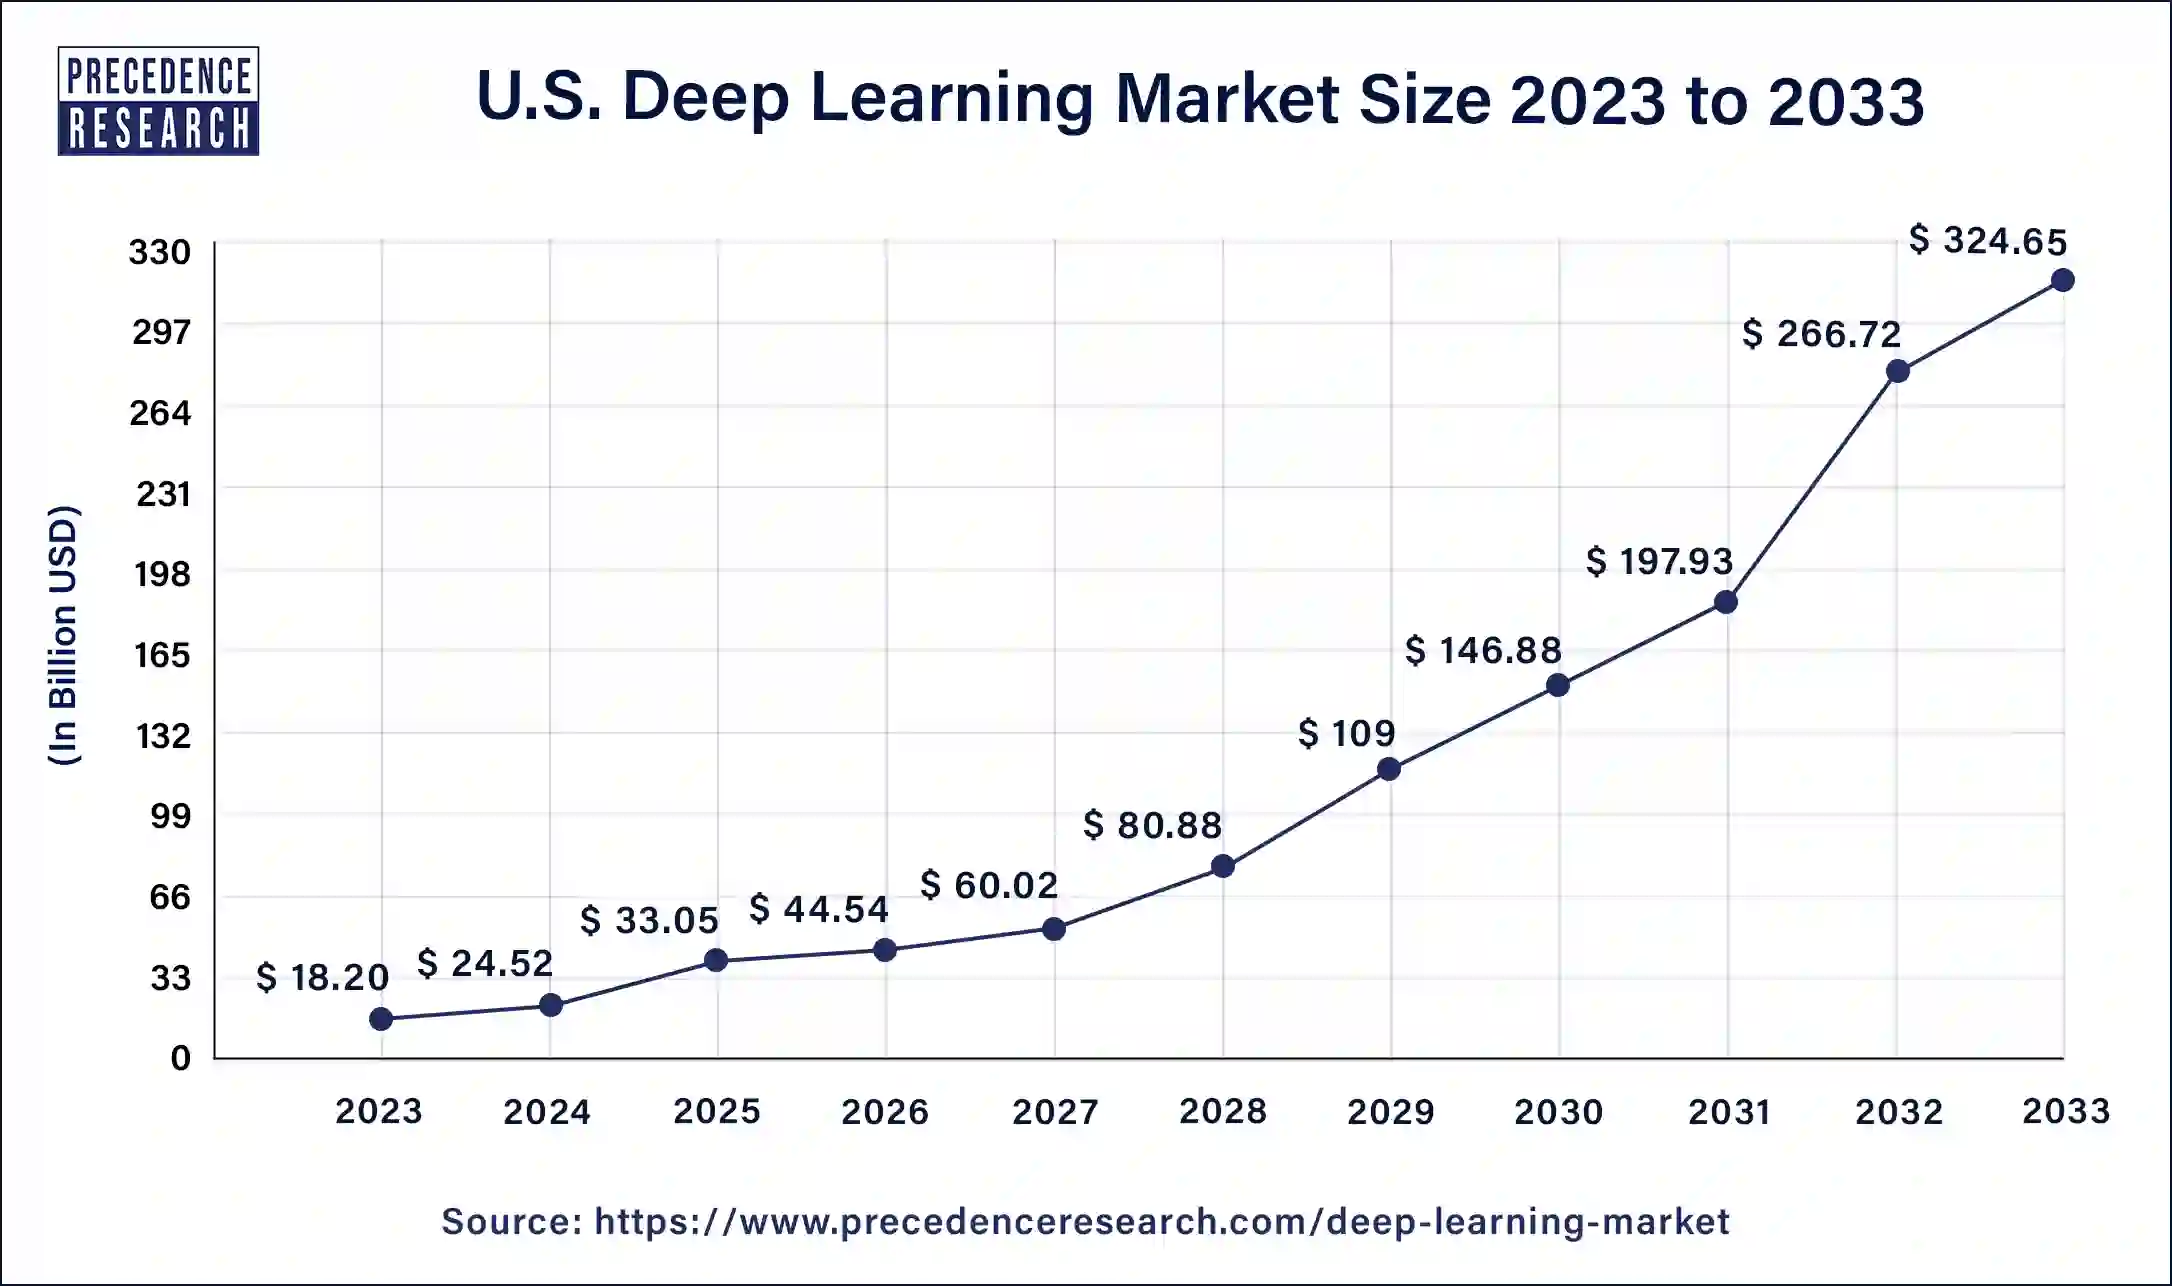 U.S. Deep Learning Market Size 2024 to 2033